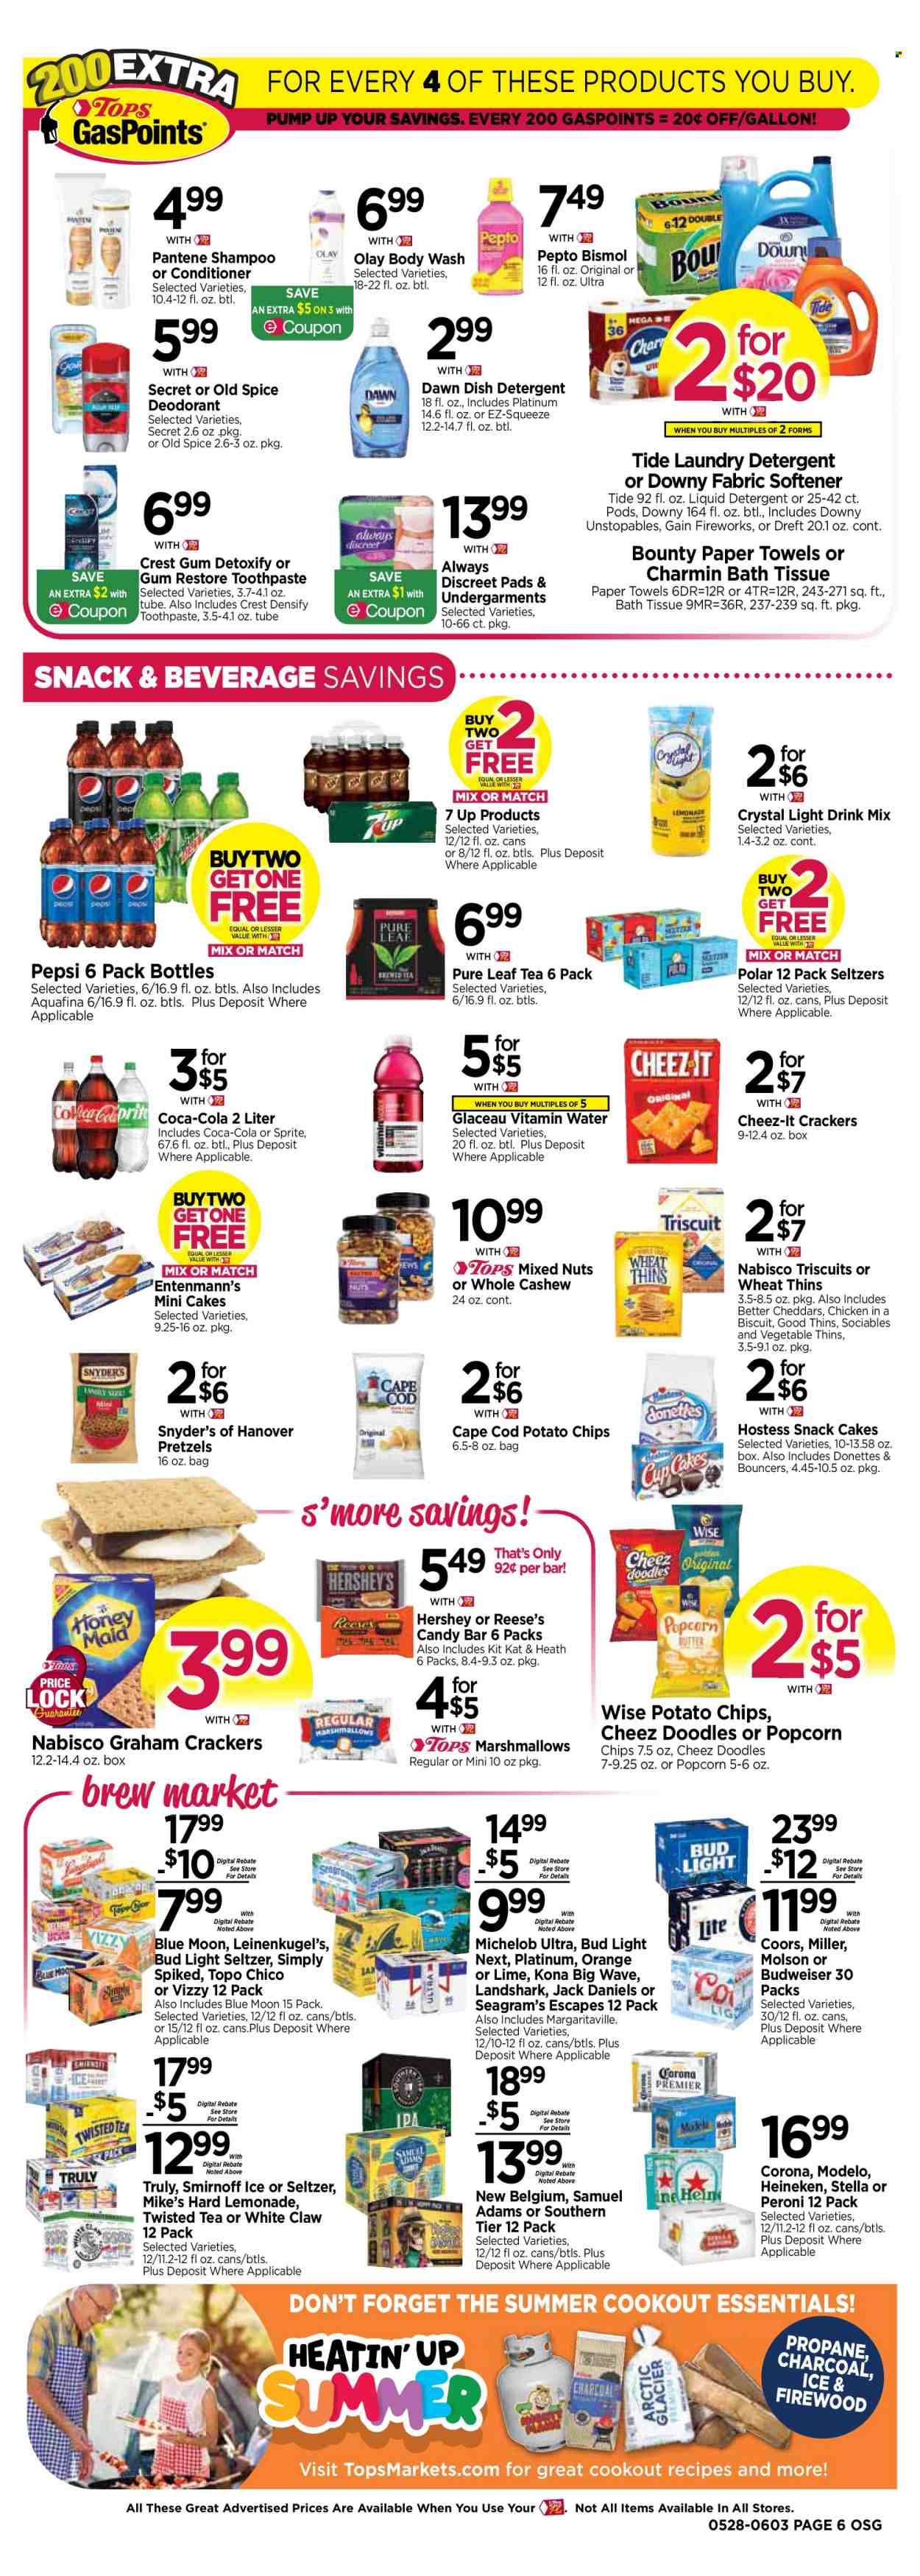 thumbnail - Tops Flyer - 05/28/2023 - 06/03/2023 - Sales products - pretzels, cake, Entenmann's, oranges, Jack Daniel's, snack, Reese's, graham crackers, marshmallows, Bounty, KitKat, crackers, biscuit, candy bar, Nabisco, potato chips, chips, Thins, popcorn, Cheez-It, salty snack, mixed nuts, Coca-Cola, lemonade, Sprite, Pepsi, ice tea, soft drink, 7UP, Aquafina, sparkling water, vitamin water, water, Pure Leaf, Smirnoff, White Claw, Hard Seltzer, TRULY, Bud Light, Corona Extra, Heineken, Peroni, Modelo, Topo Chico, chicken, bath tissue, kitchen towels, paper towels, Charmin, detergent, Gain, Tide, Unstopables, fabric softener, liquid detergent, laundry detergent, Gain Fireworks, Downy Laundry, WAVE, dishwasher cleaner, body wash, shampoo, Old Spice, toothpaste, Crest, sanitary pads, Always Discreet, Olay, conditioner, Pantene, Budweiser, Leinenkugel's, Coors, Blue Moon, Twisted Tea, Michelob. Page 6.